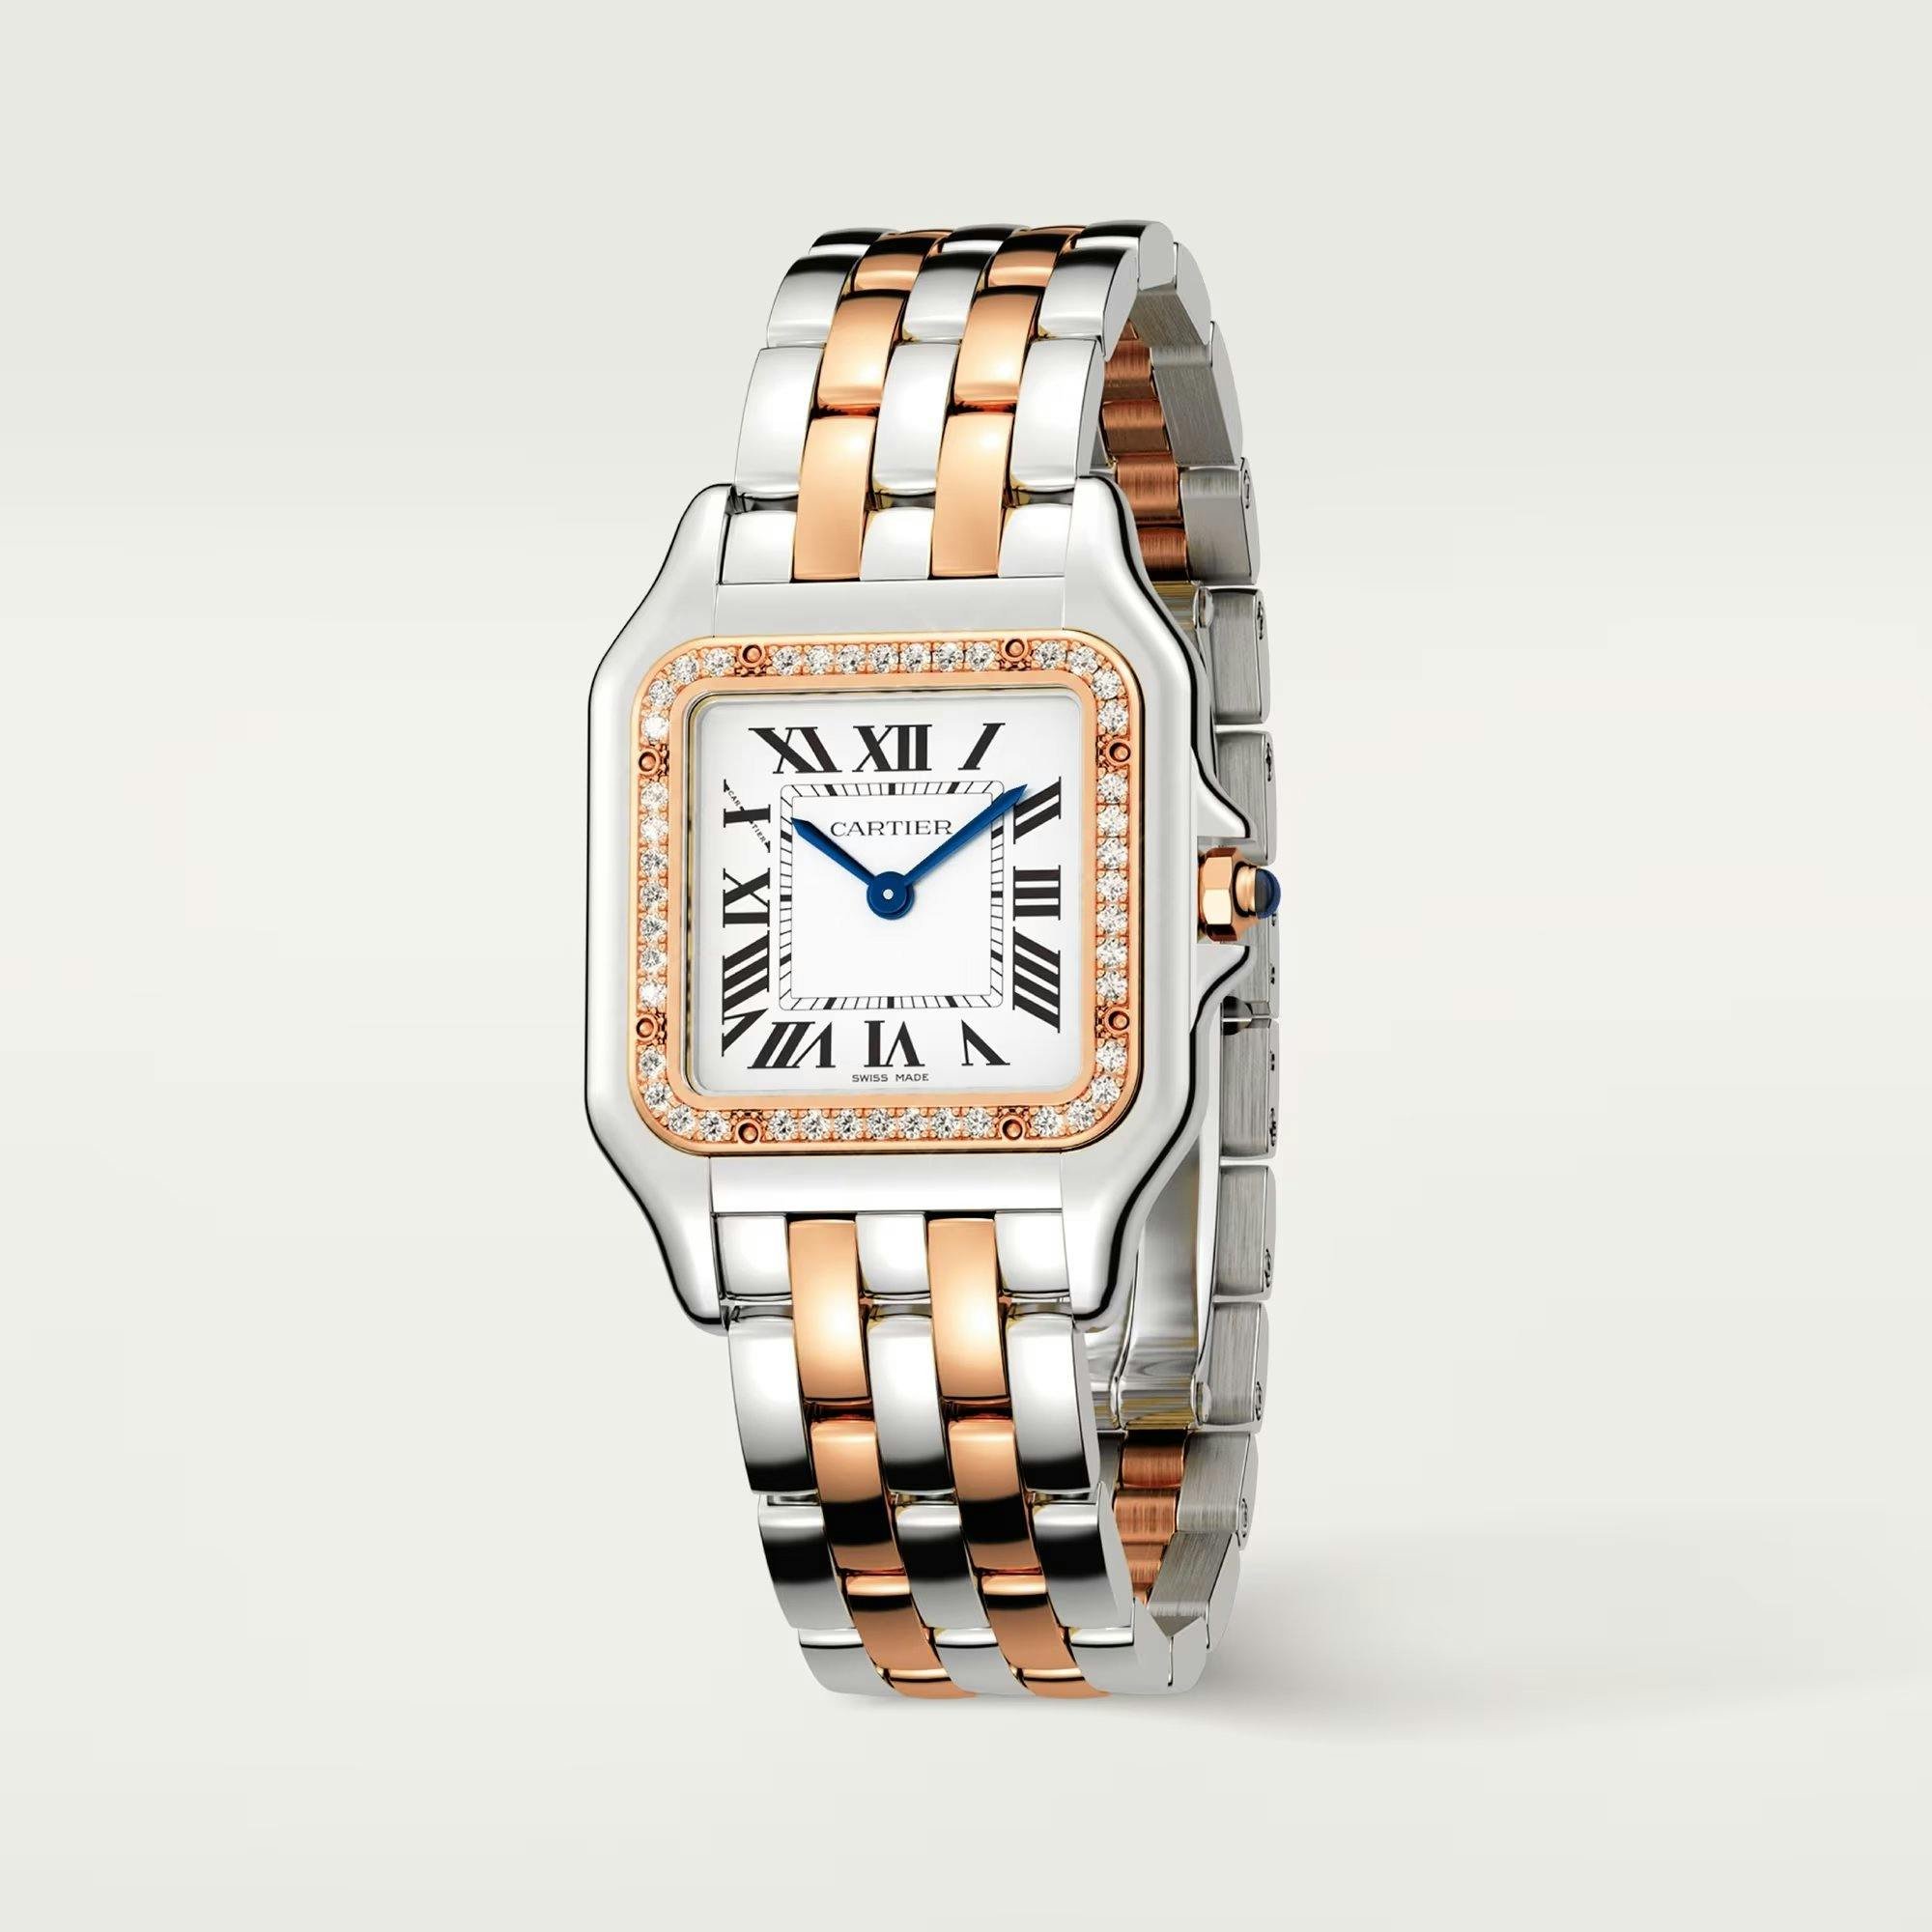 Panthere de Cartier Watch in Rose Gold with Diamonds 8